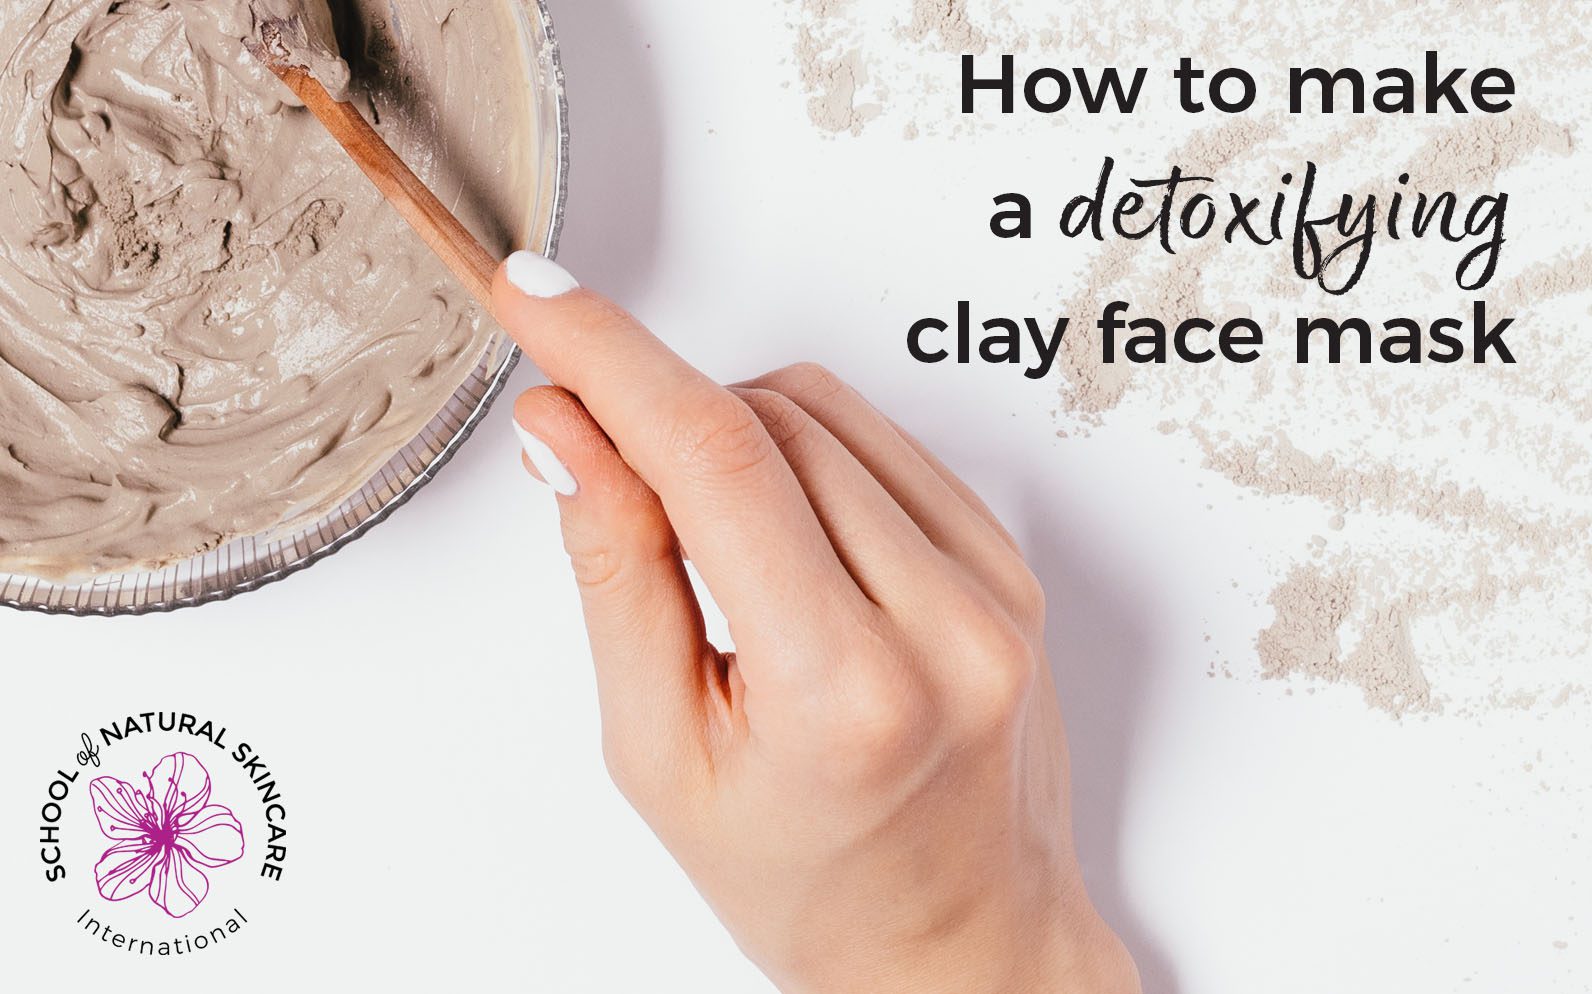 How to make a Detoxifying Clay Mask - School of Natural Skincare